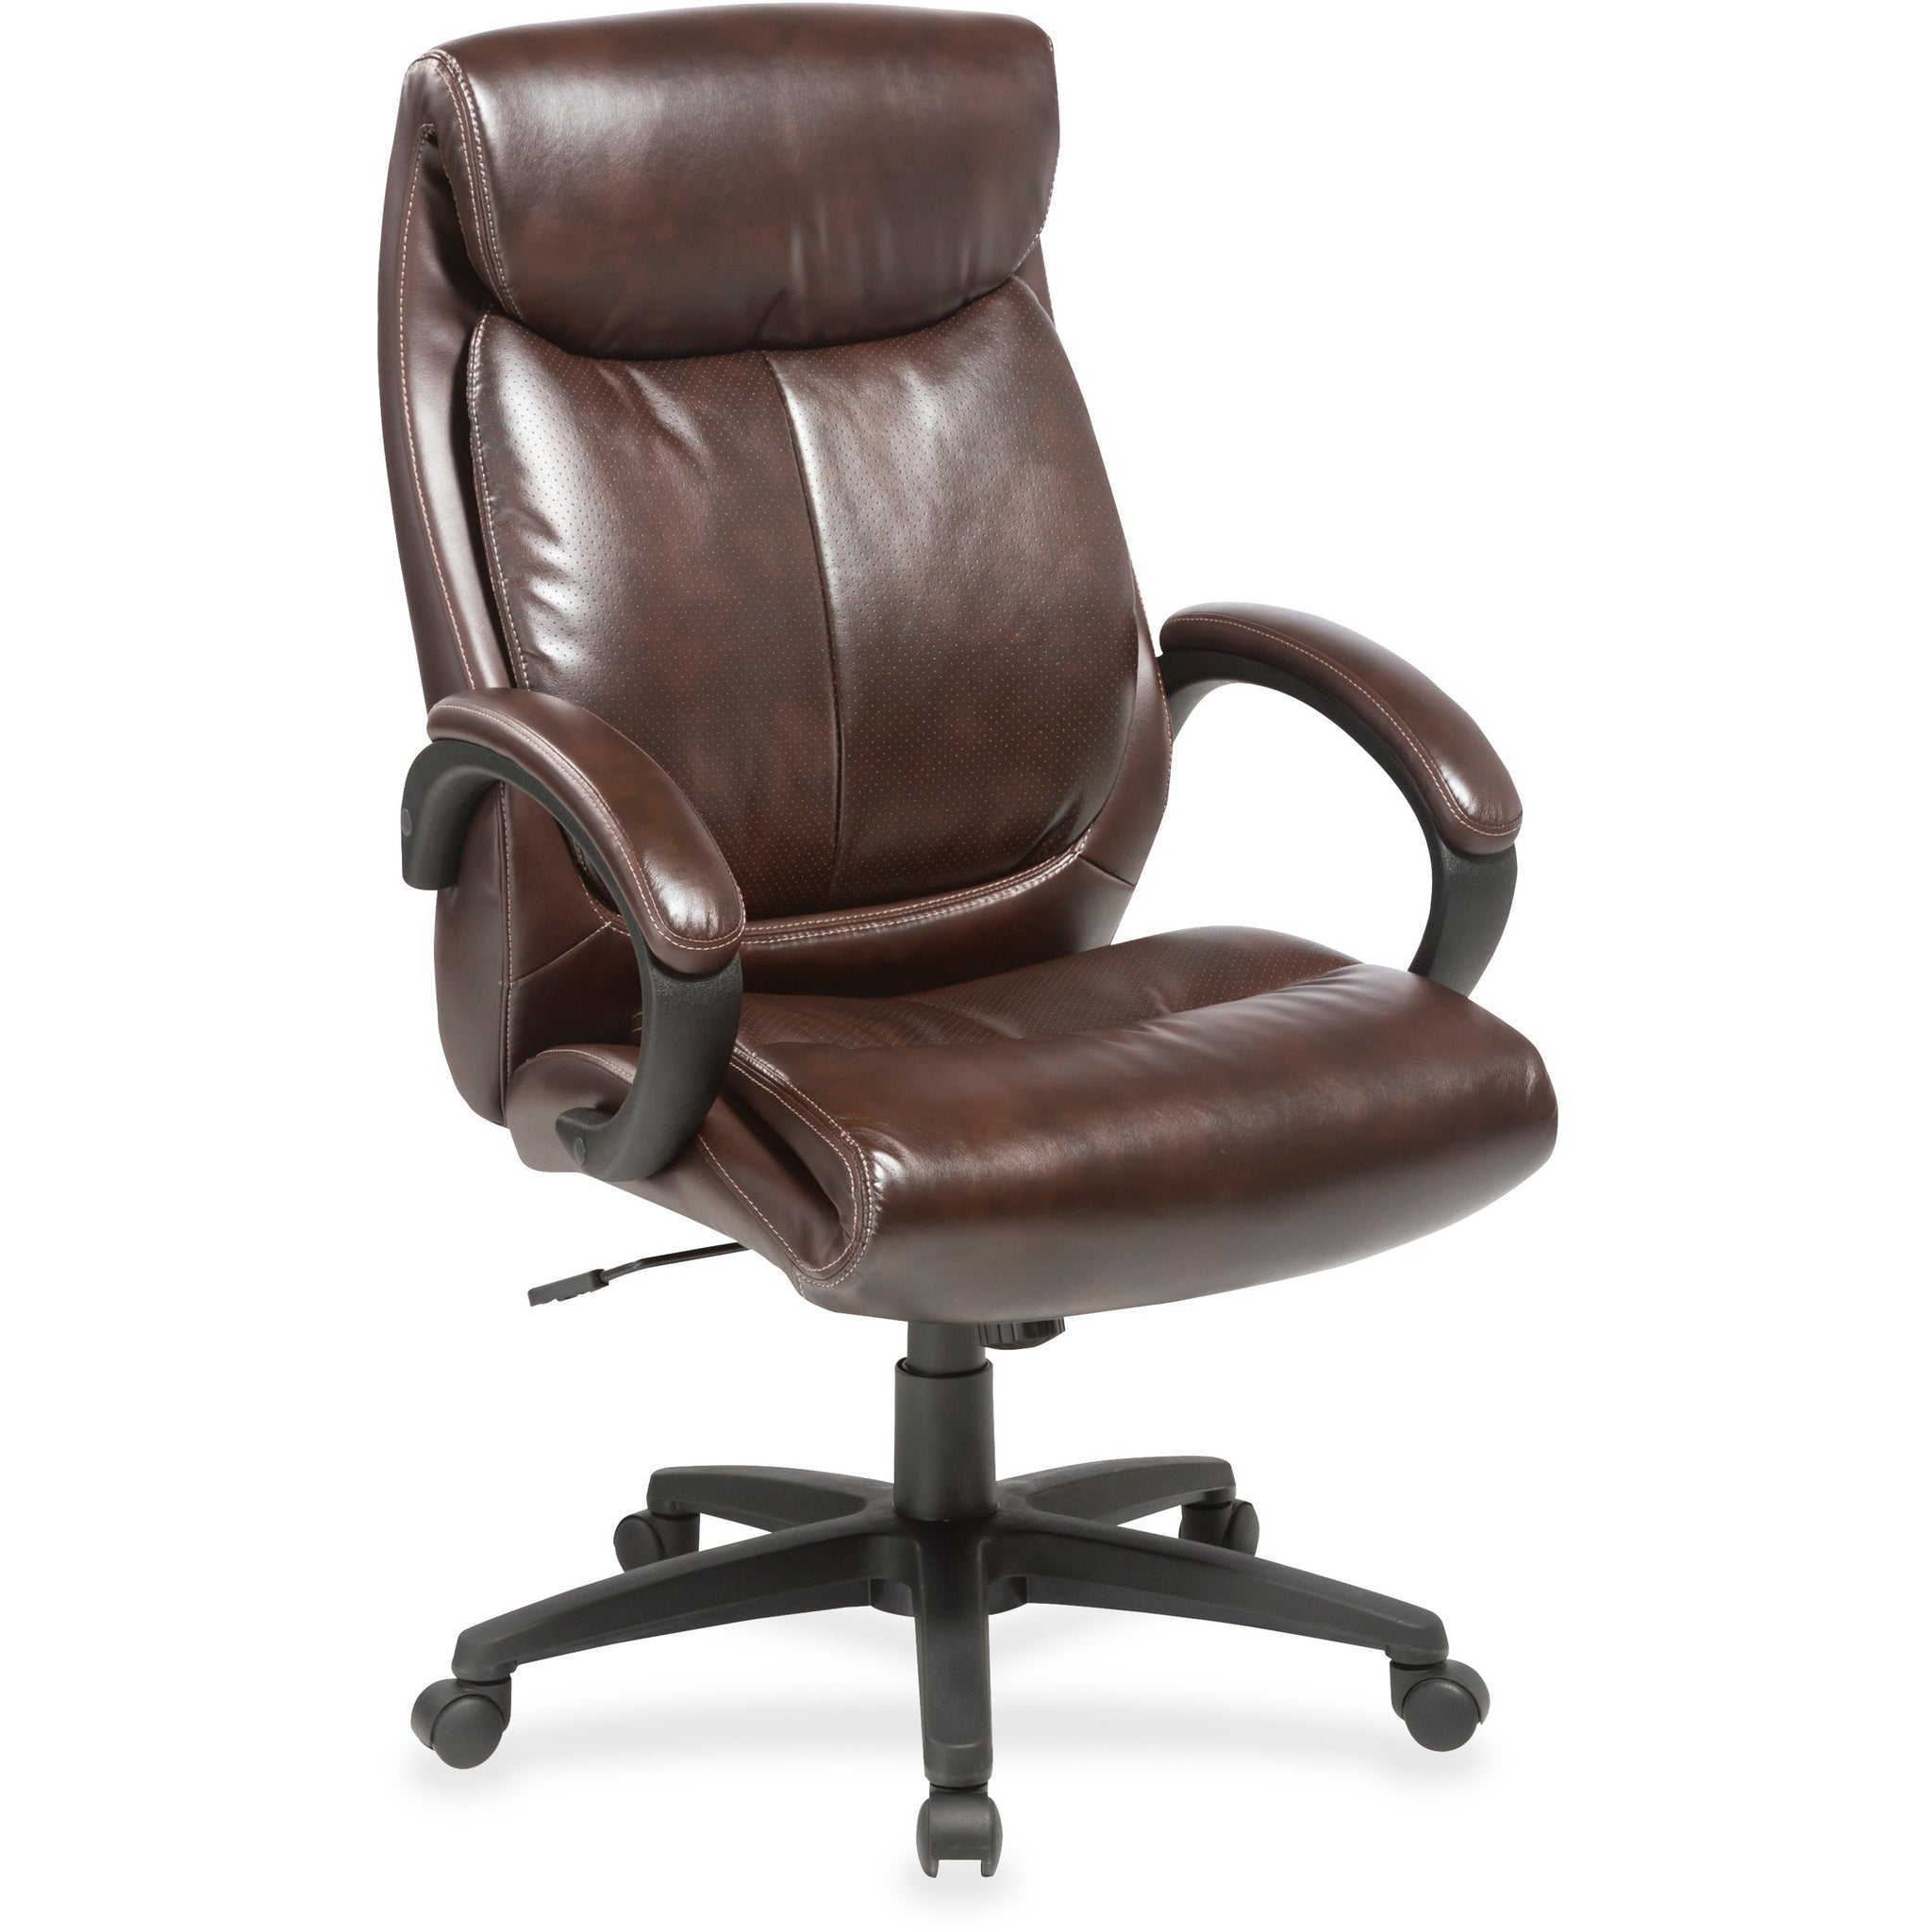 Executive Brown Bonded Leather Chair